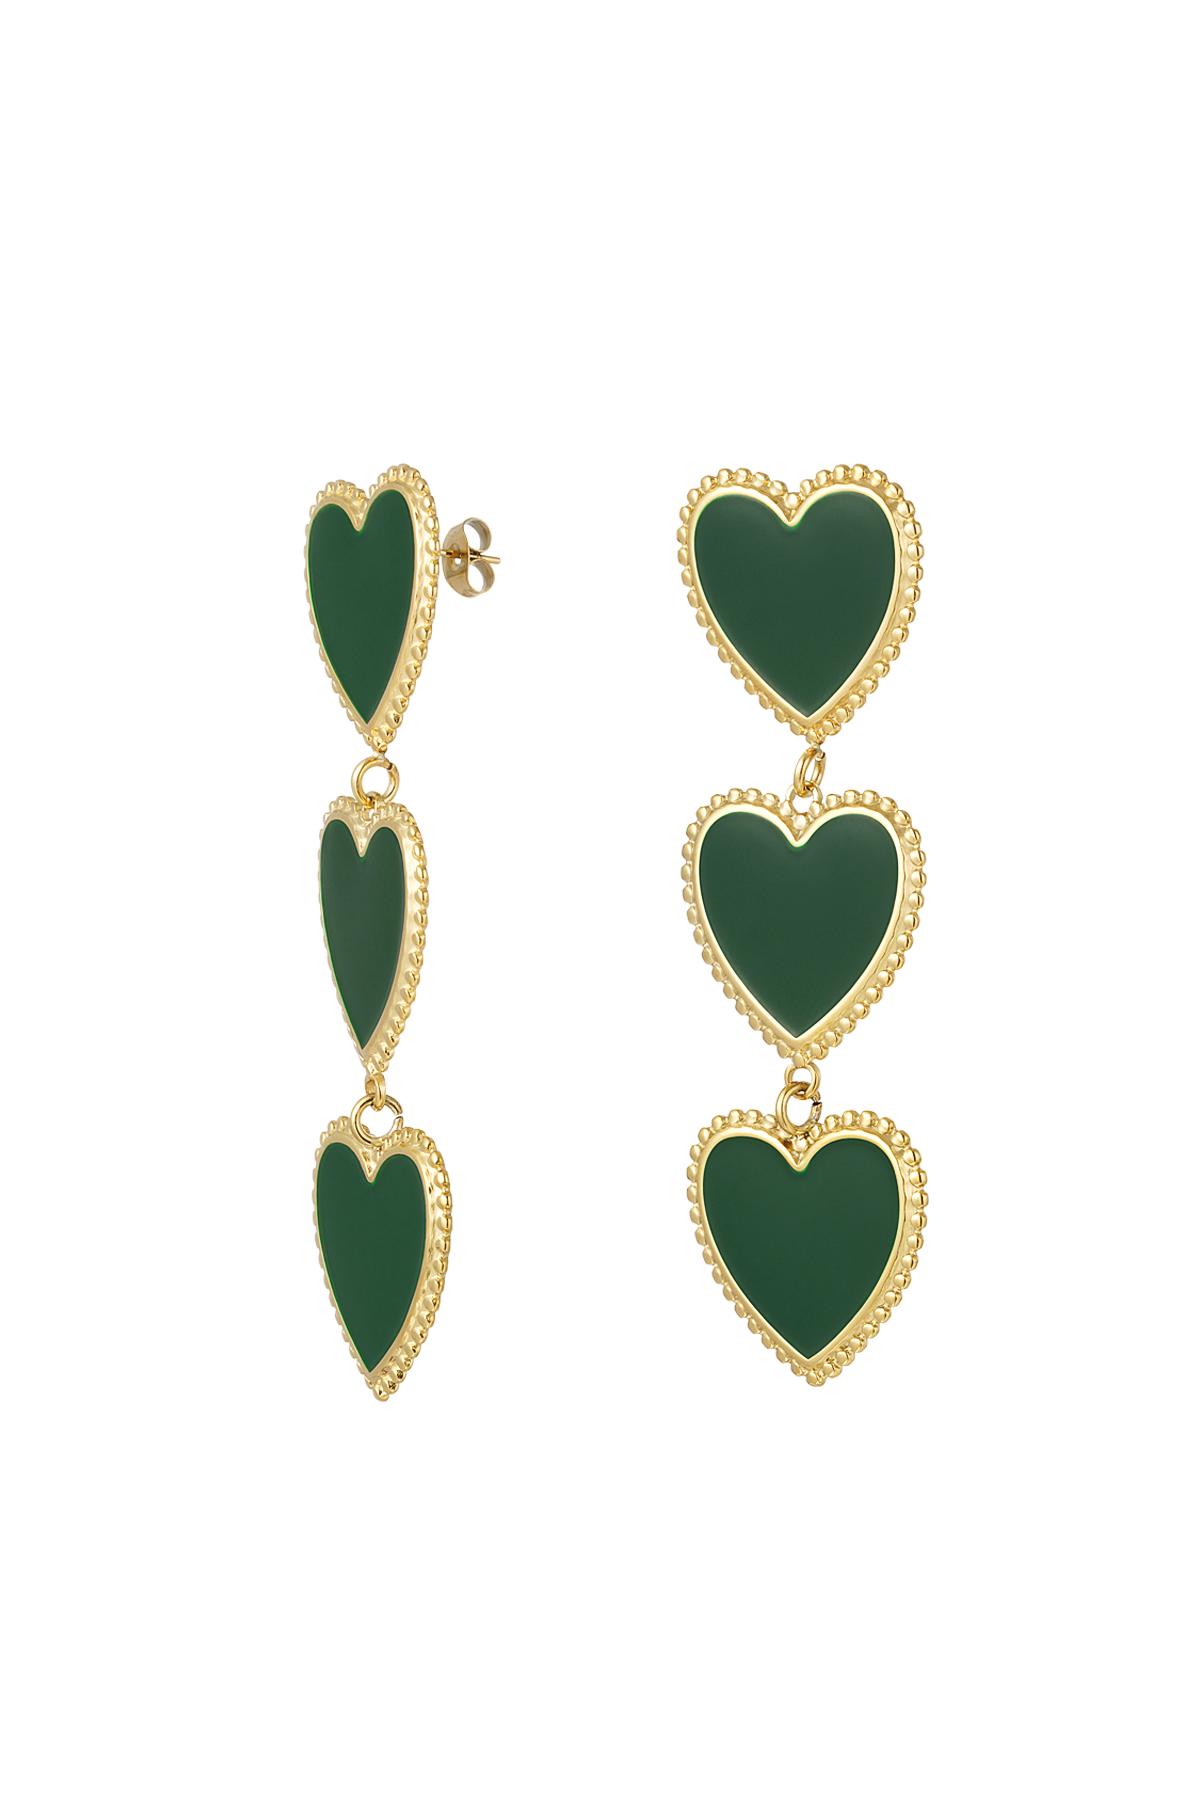 Earrings 3 graceful hearts in a row Green &amp; Gold Stainless Steel